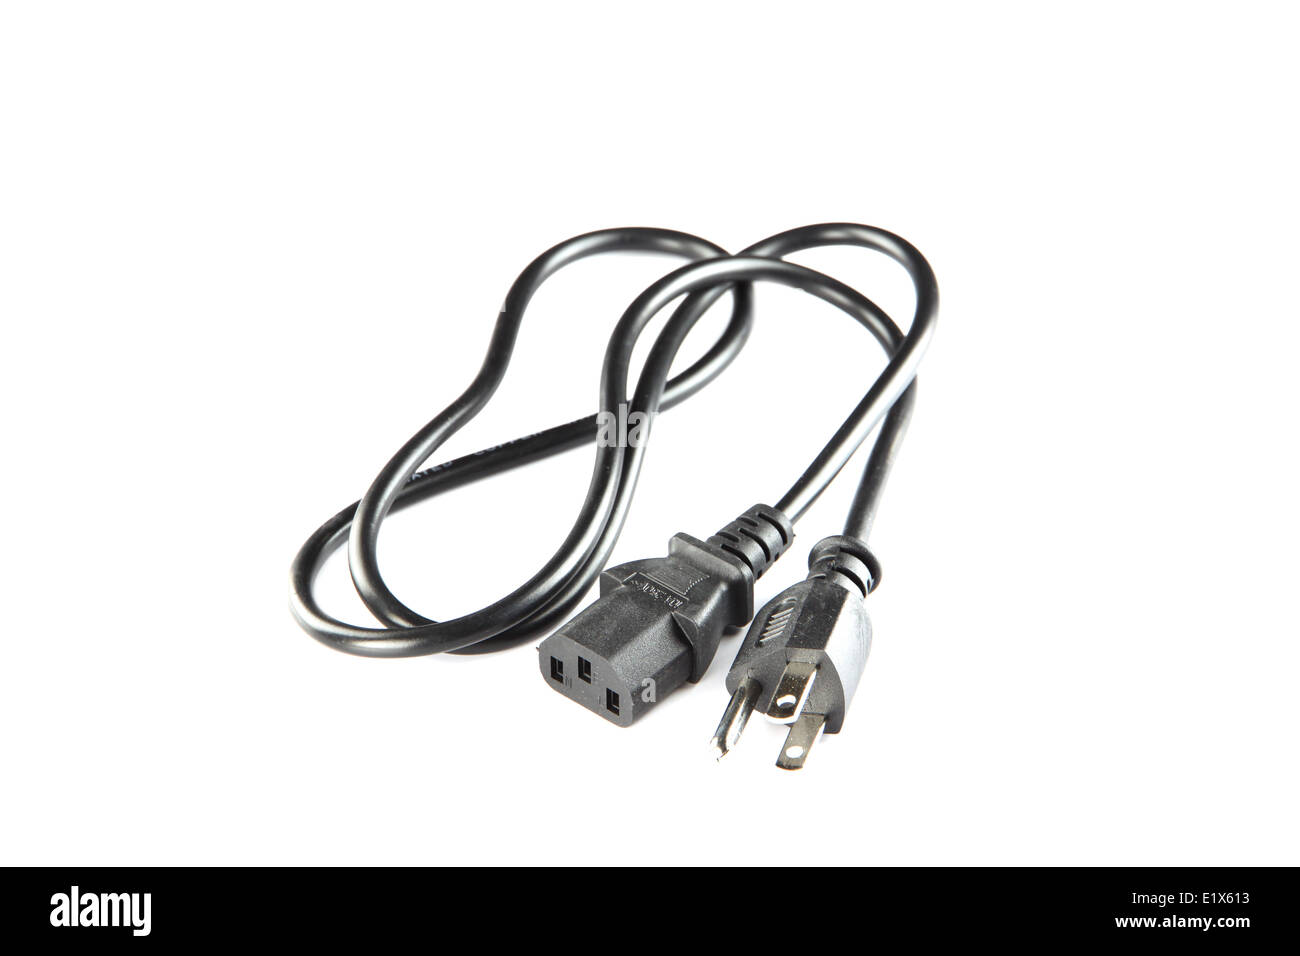 Black power cable of plug and socket isolated on white background. Stock Photo